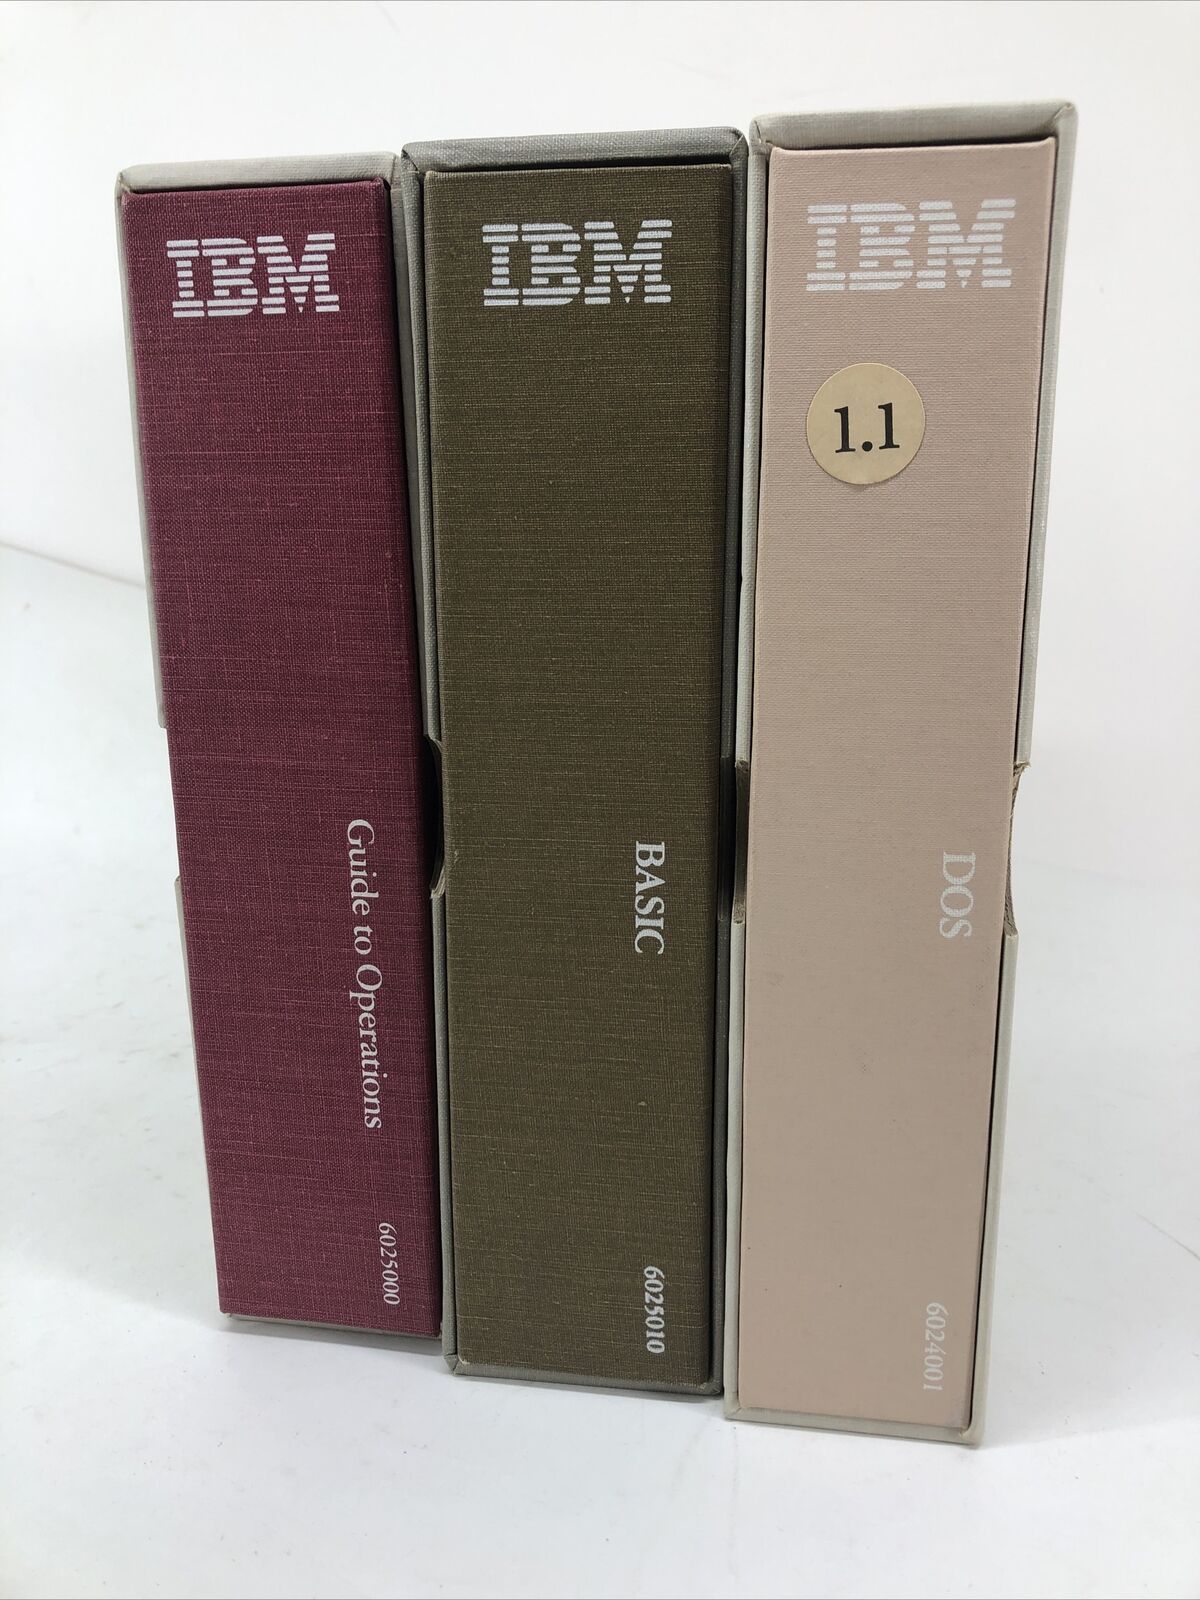 Vintage IBM Books Book Set 3 Books DOS, BASIC, Guide to Operations  NO DISCS